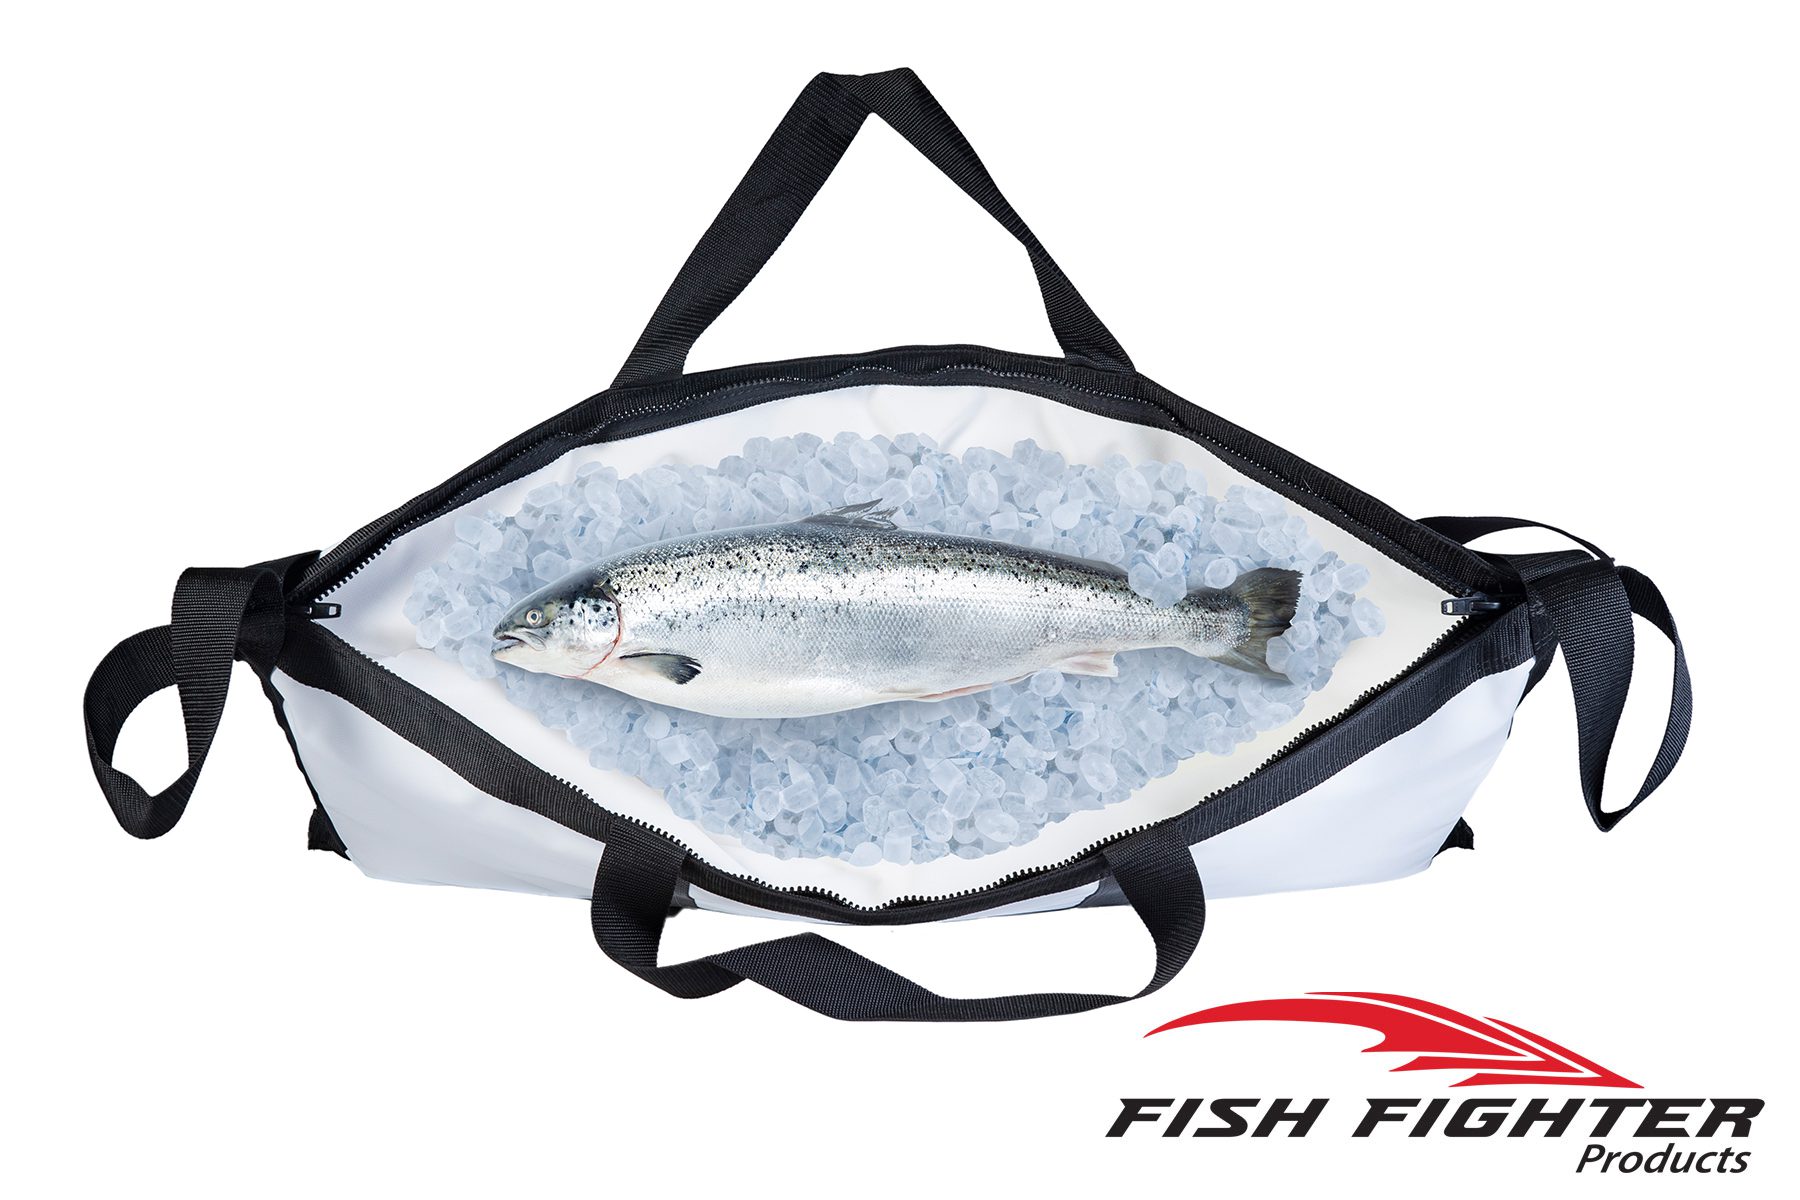 High Quality Durable Insulated Fish Cooler Bag Manufacturers and